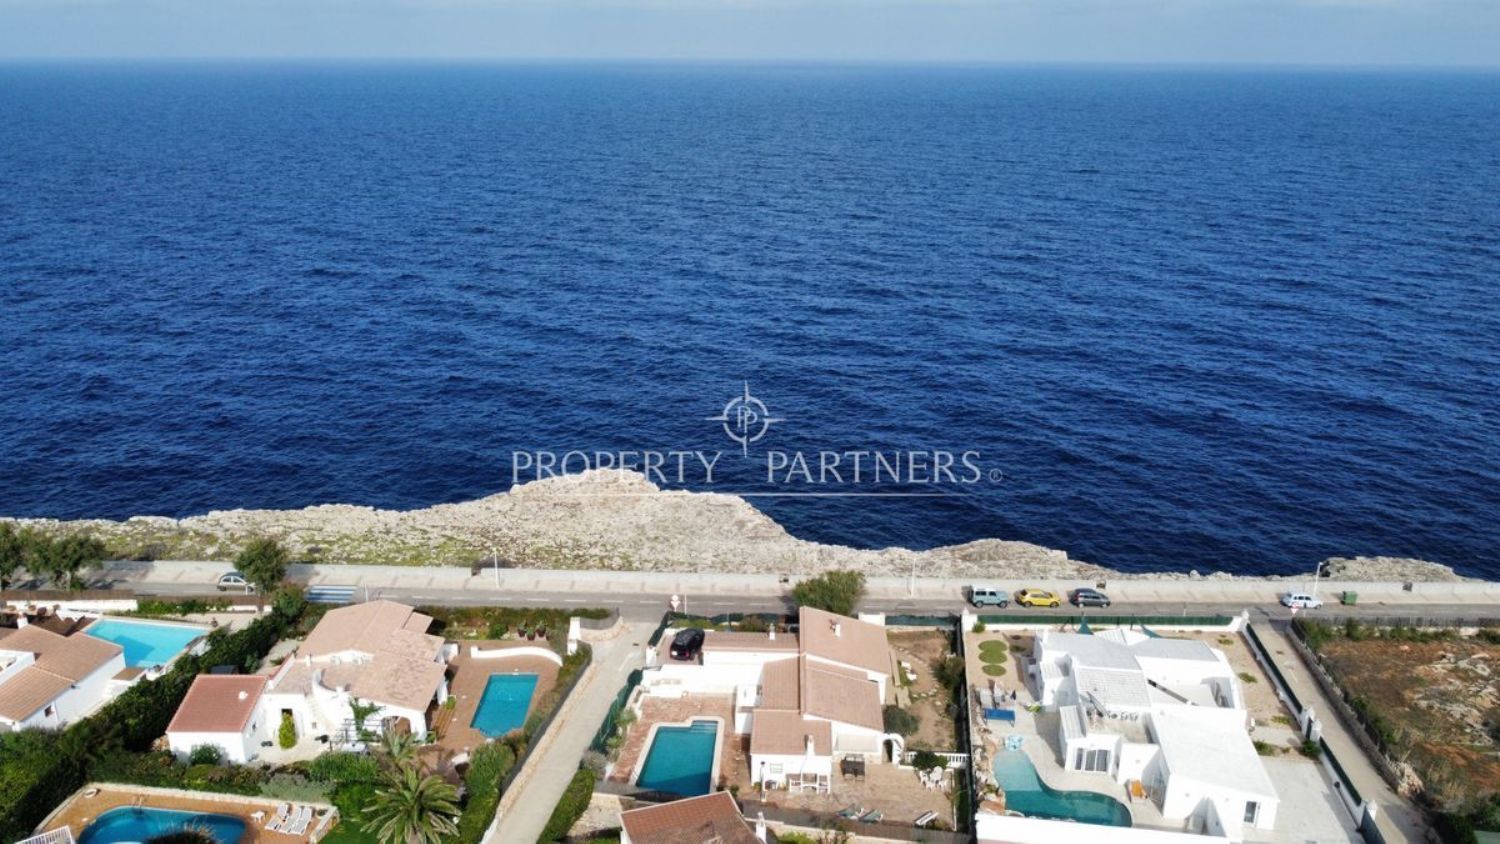 House for sale on the seafront in Sant Lluis, Menorca